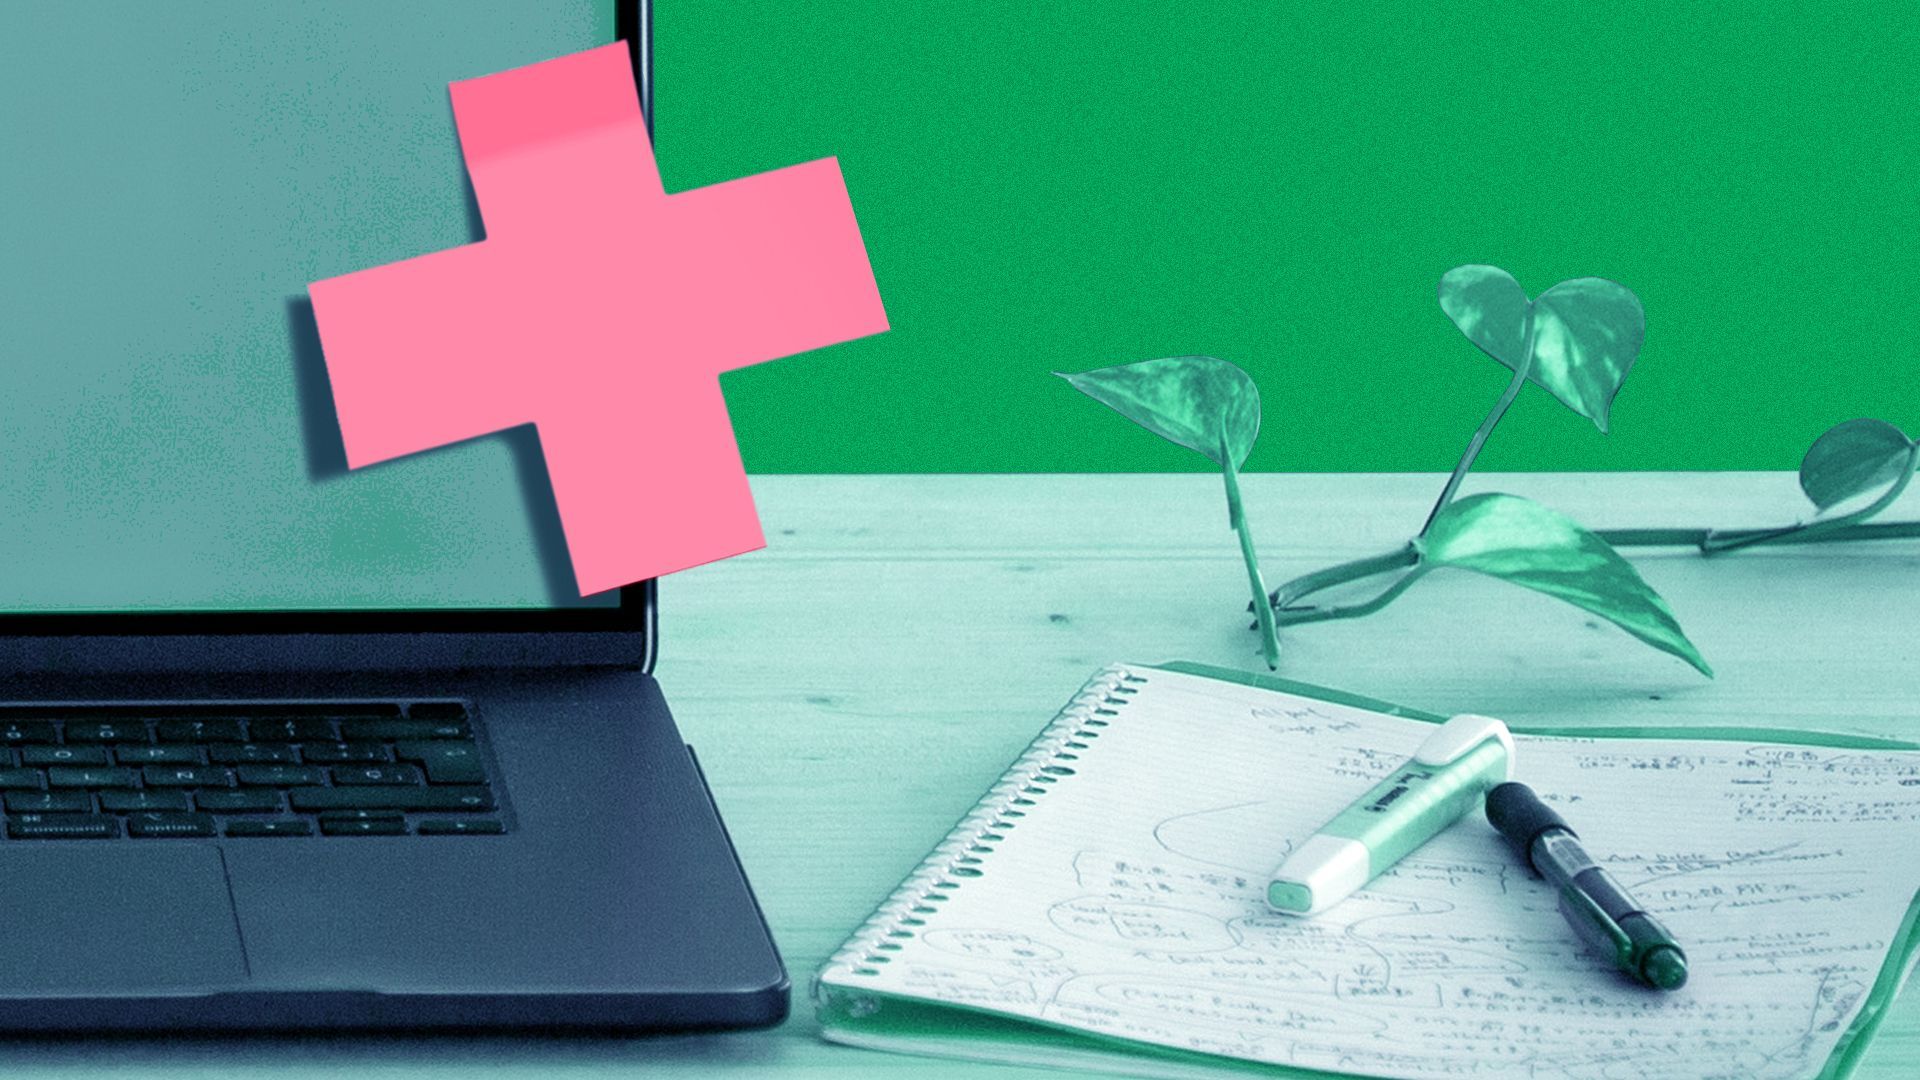 Illustration of a red medical cross-shaped sticky note stuck to an open laptop screen, next to a desk top covered with a plant and a notebook with pens